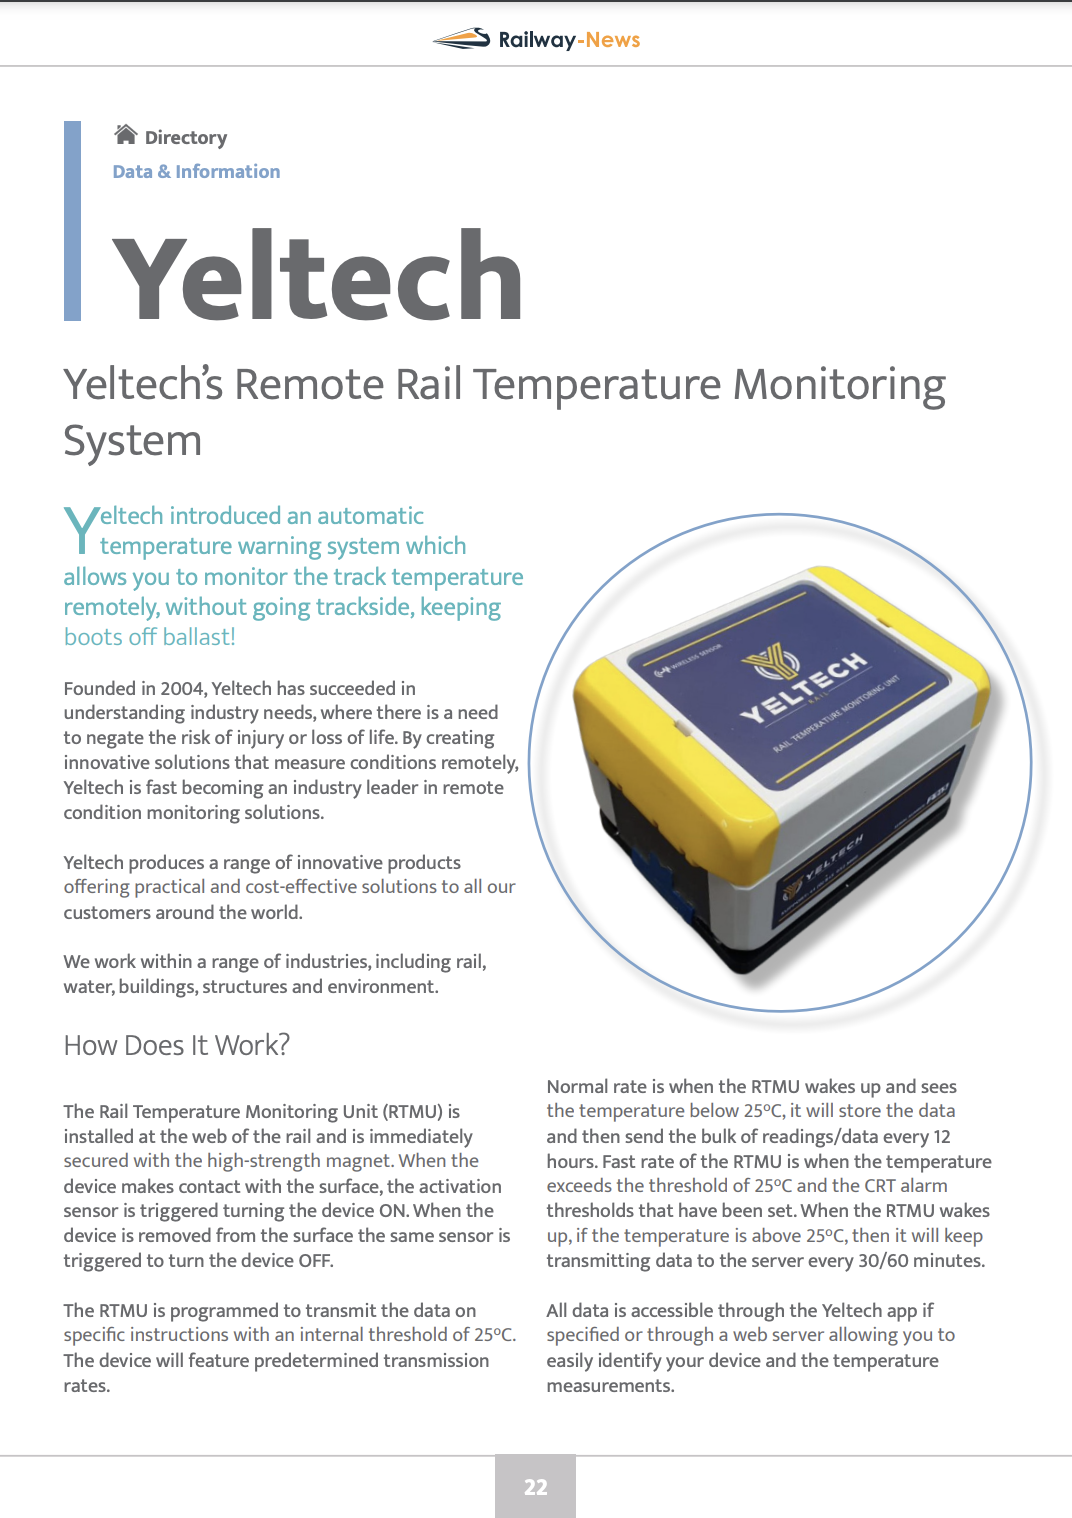 https://railway-news.com/wp-content/uploads/2023/03/Yeltech-Ltd-Yeltechs-Remote-Rail-Temperature-Monitoring-System.png